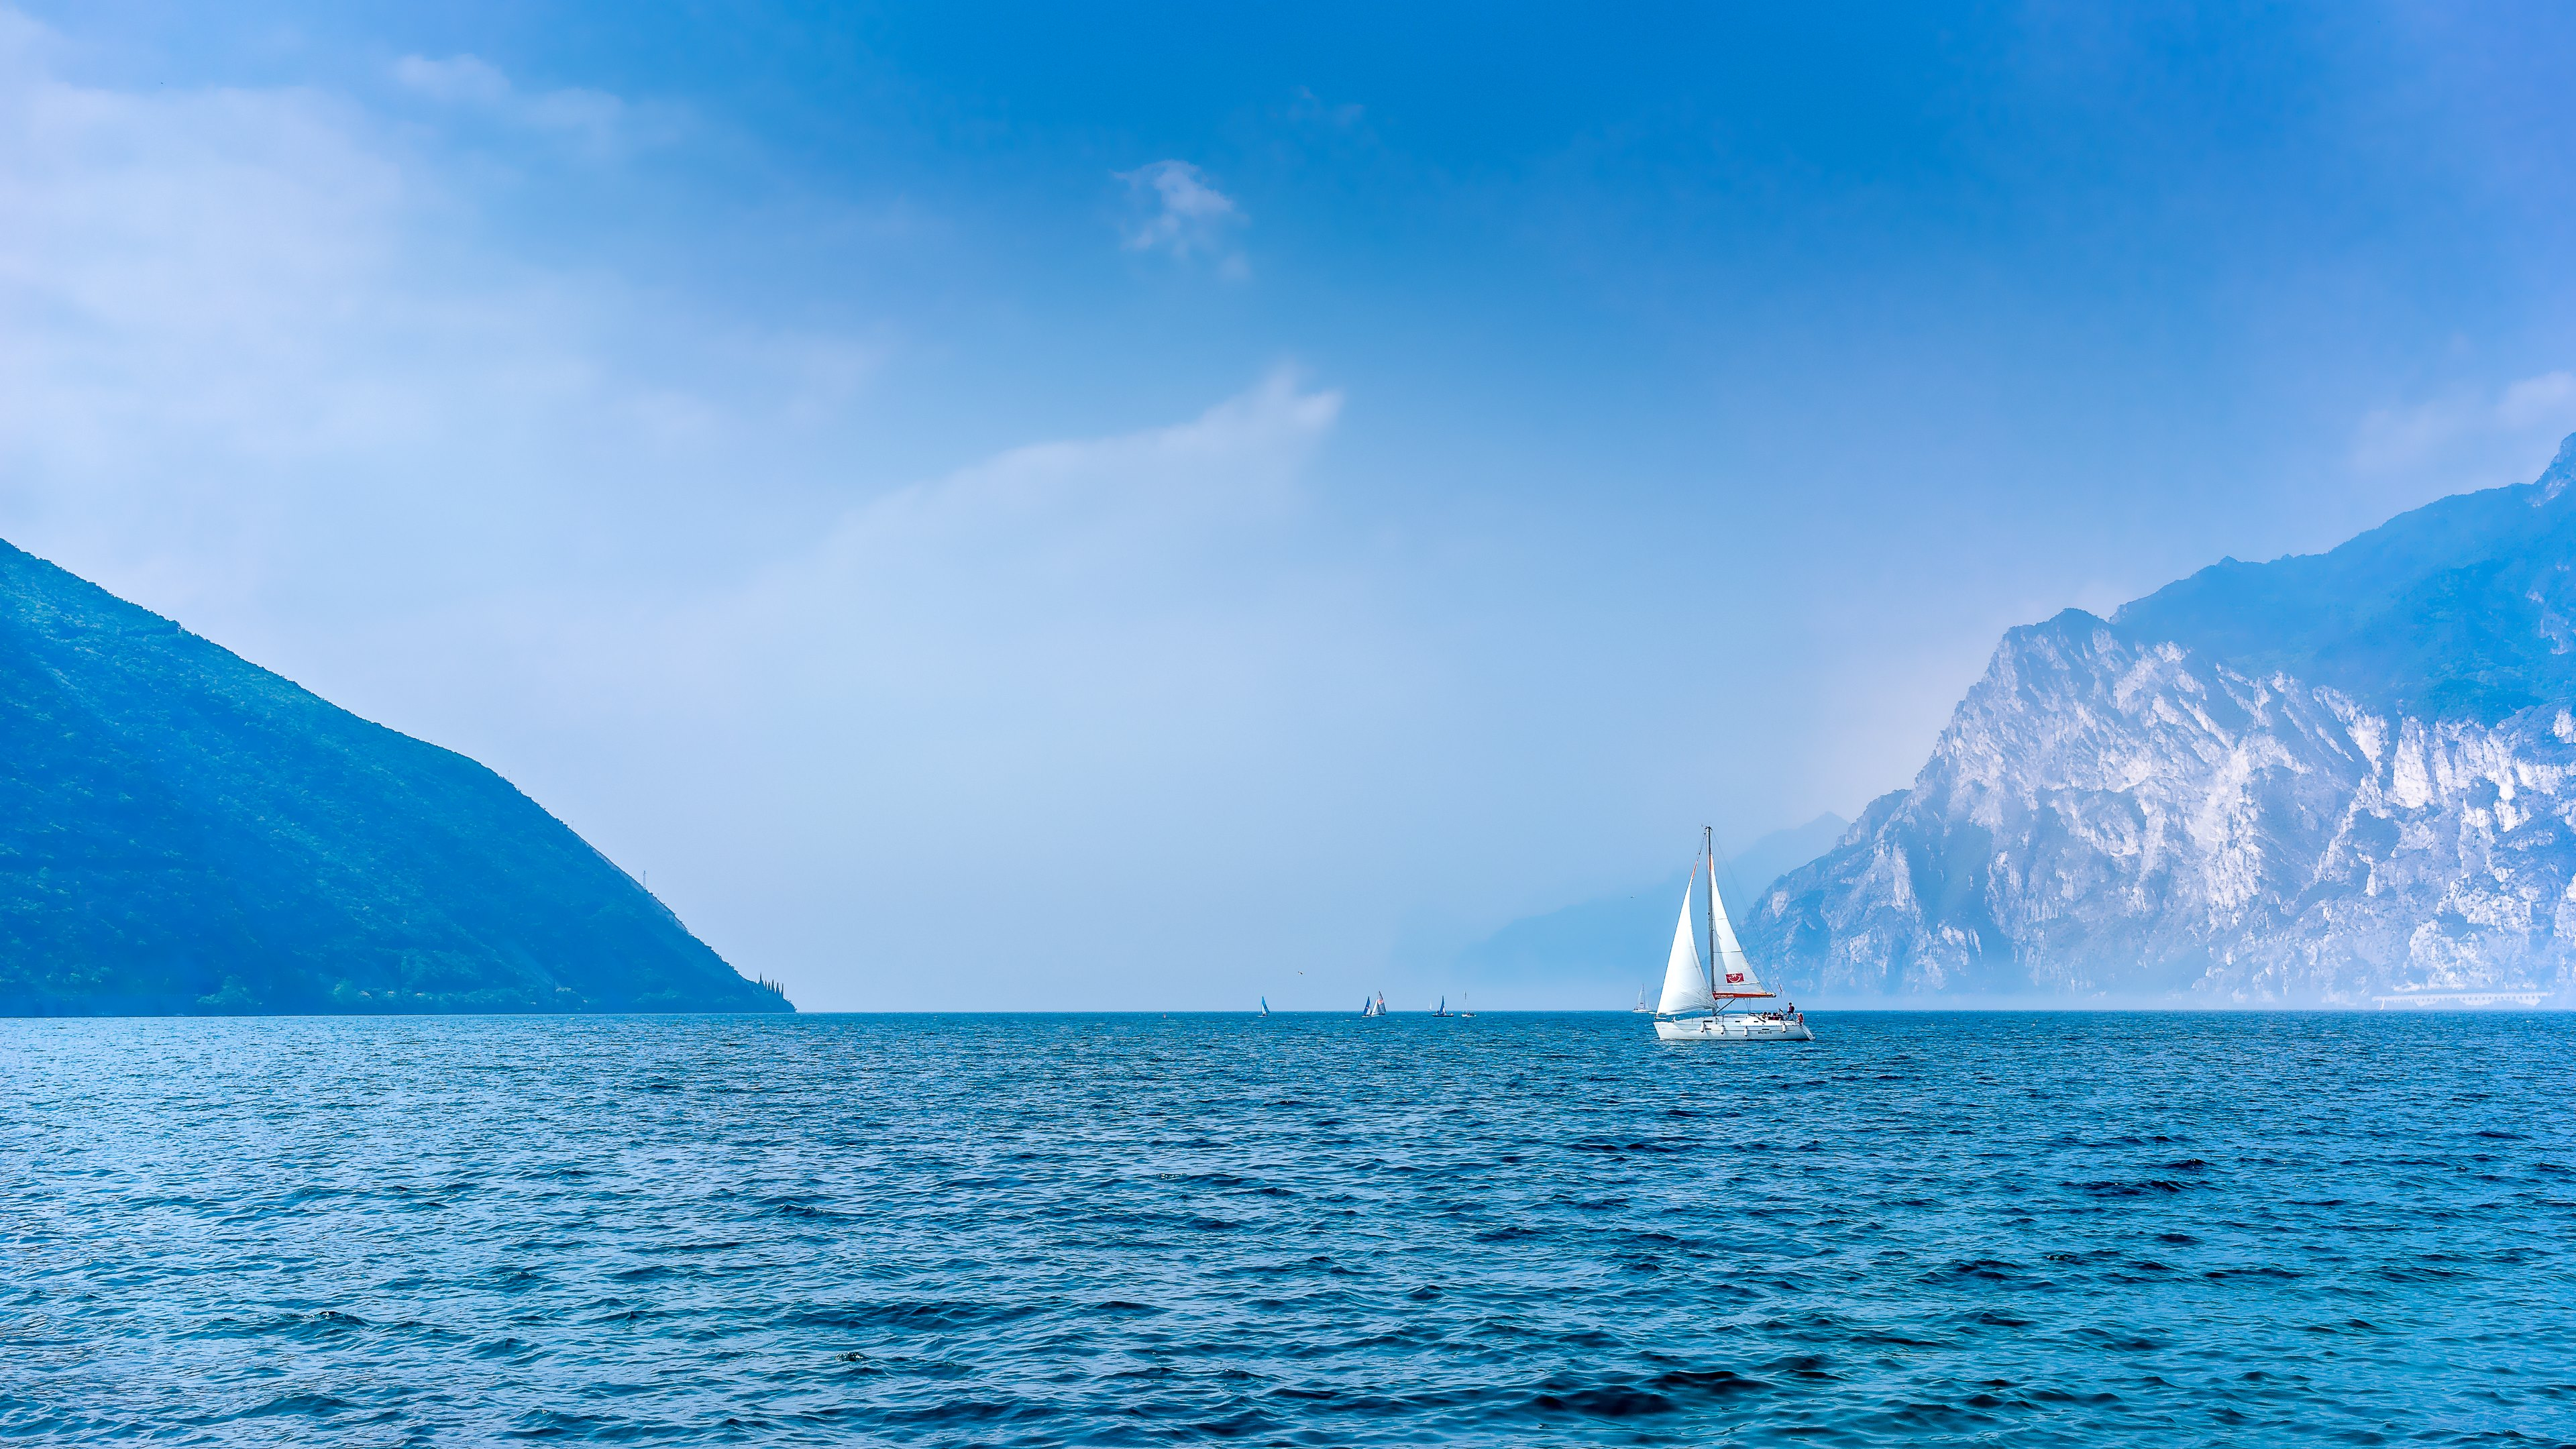 3840x2160 140+ Sailboat HD Wallpapers and Backgrounds